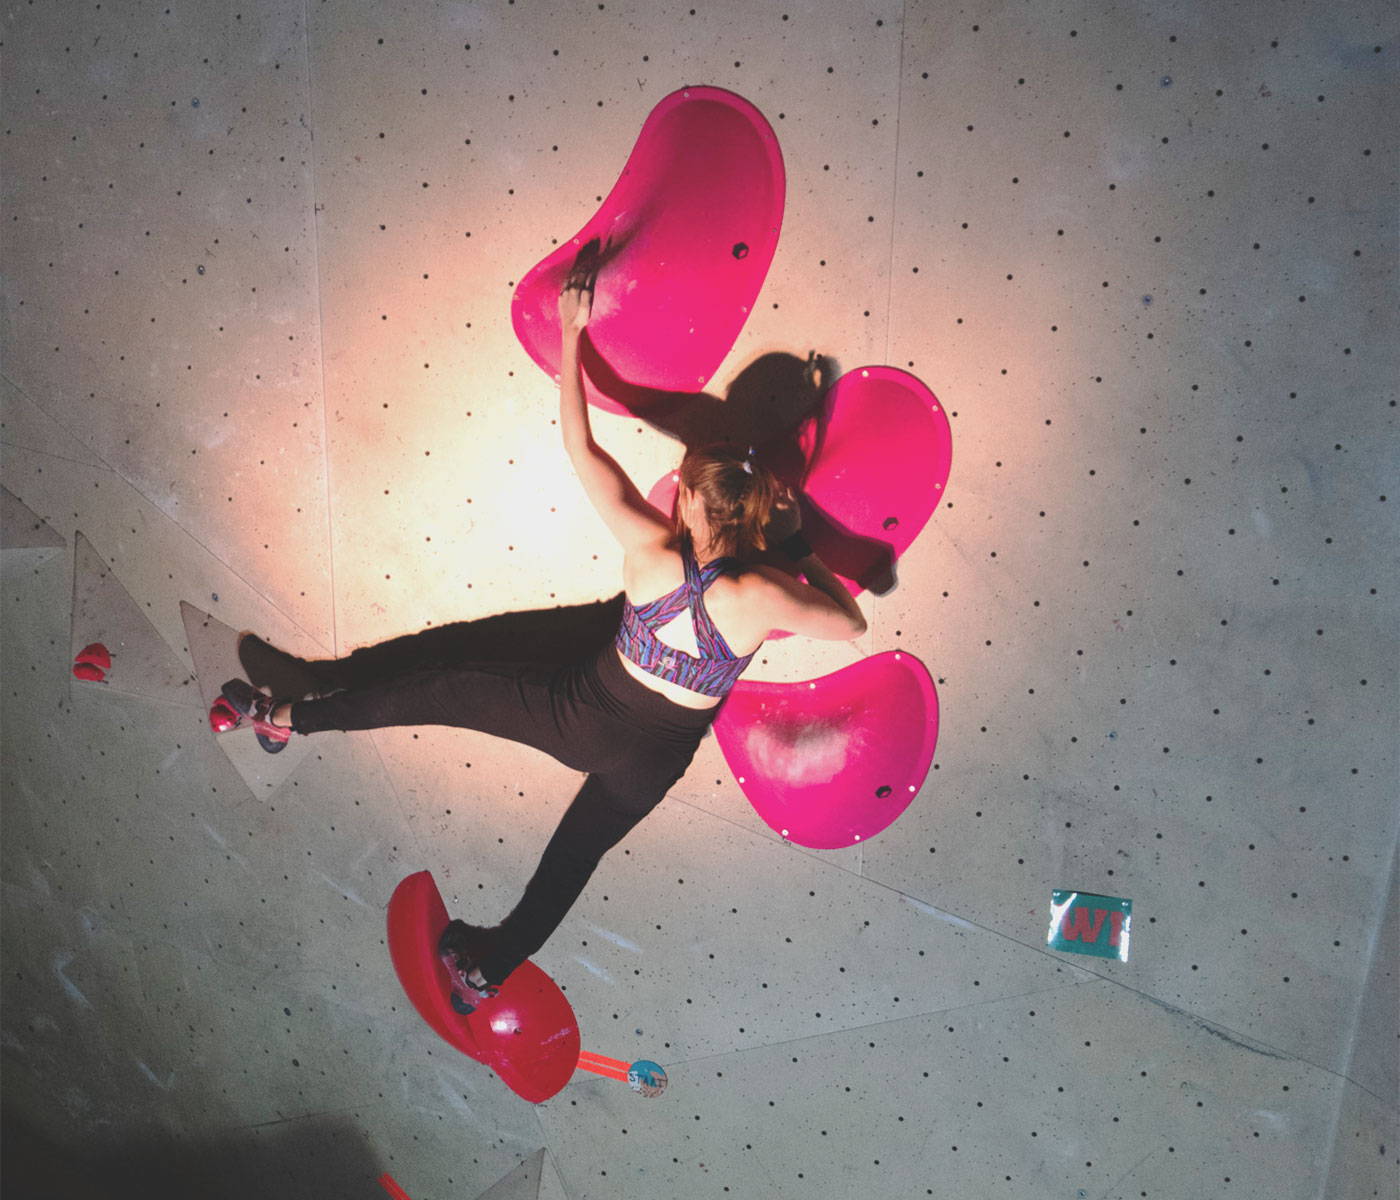 This photo shows 3RD ROCK warrior Imi doused in a spotlight when climbing at a compeition.